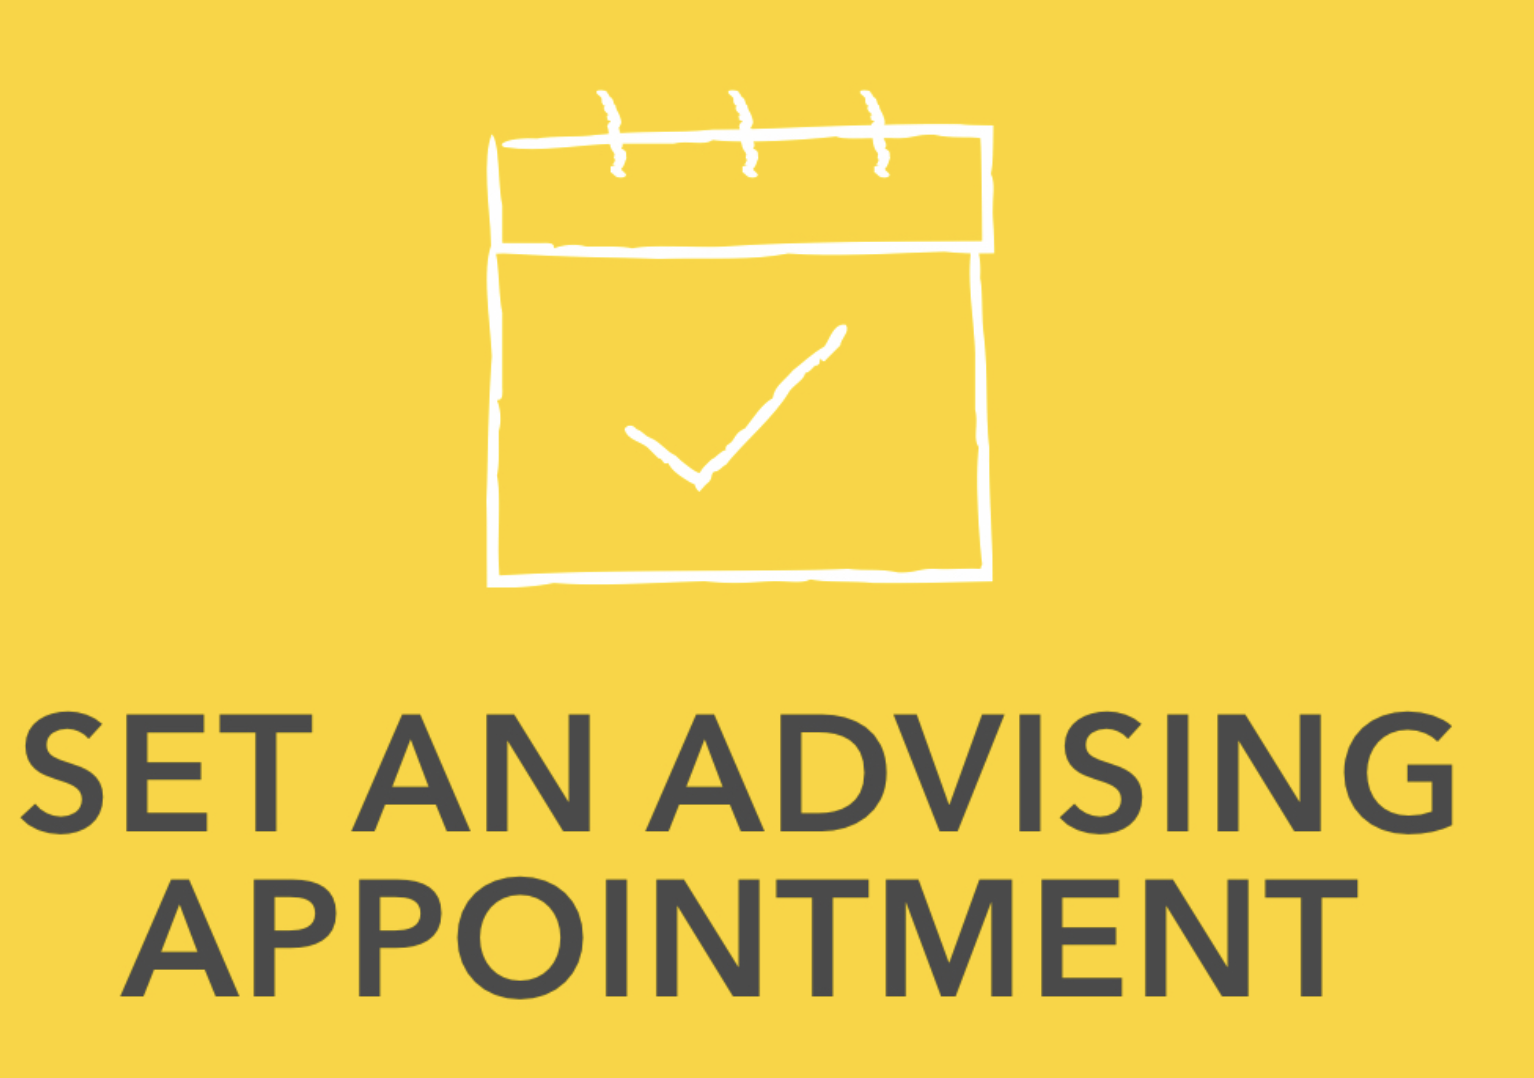 set an advising appointment